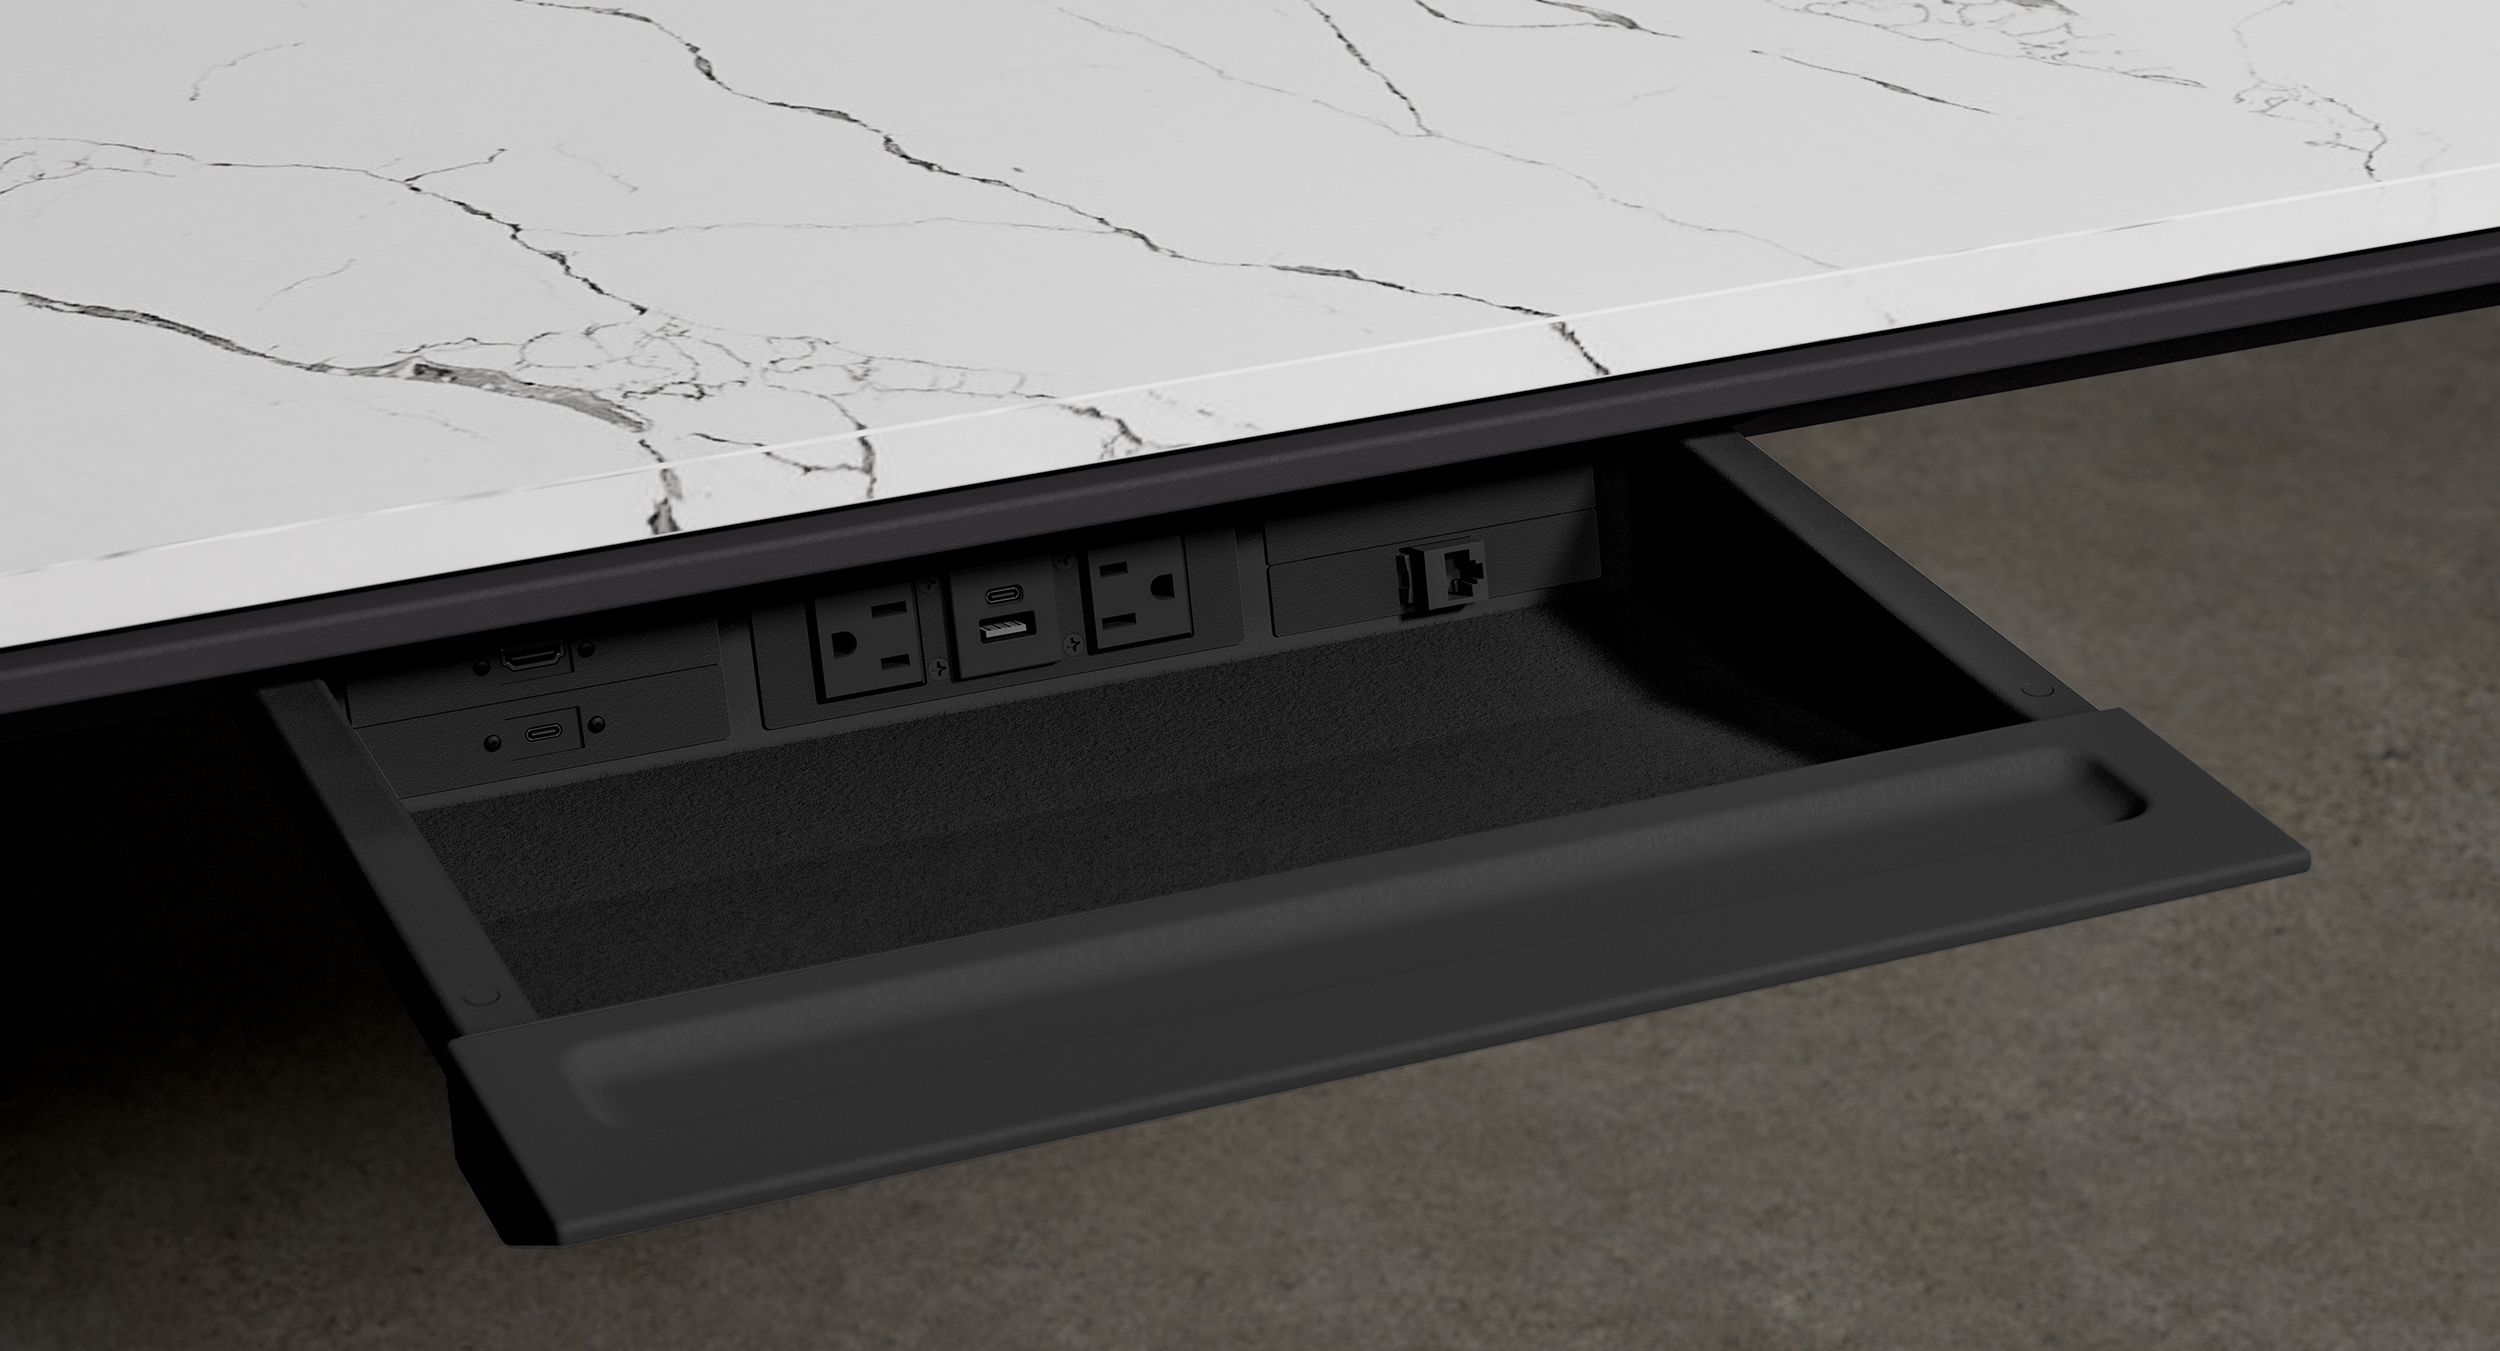 Perimeter power drawers are now seamlessly integrated into the Halo edge, providing patented protection for table and chair and delivering even more technology and accessory storage.